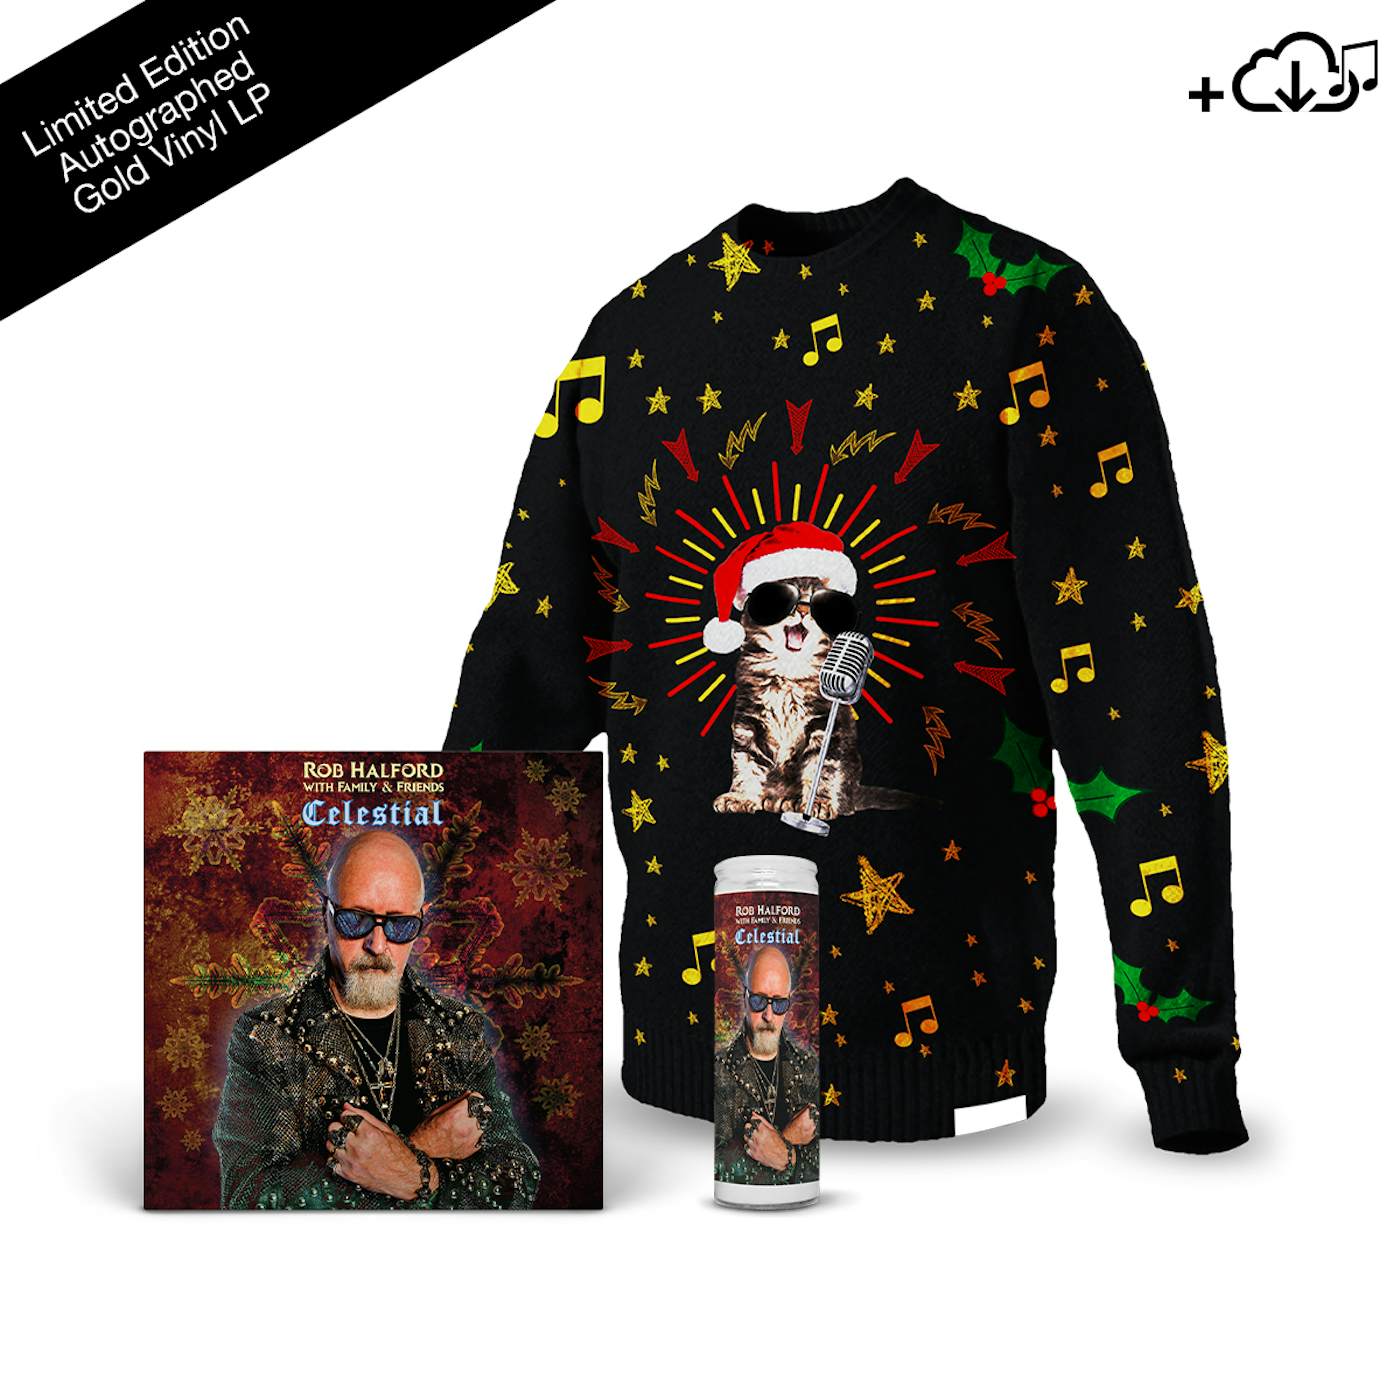 Rob Halford Celestial + Knitted Christmas Sweater + Prayer Candle